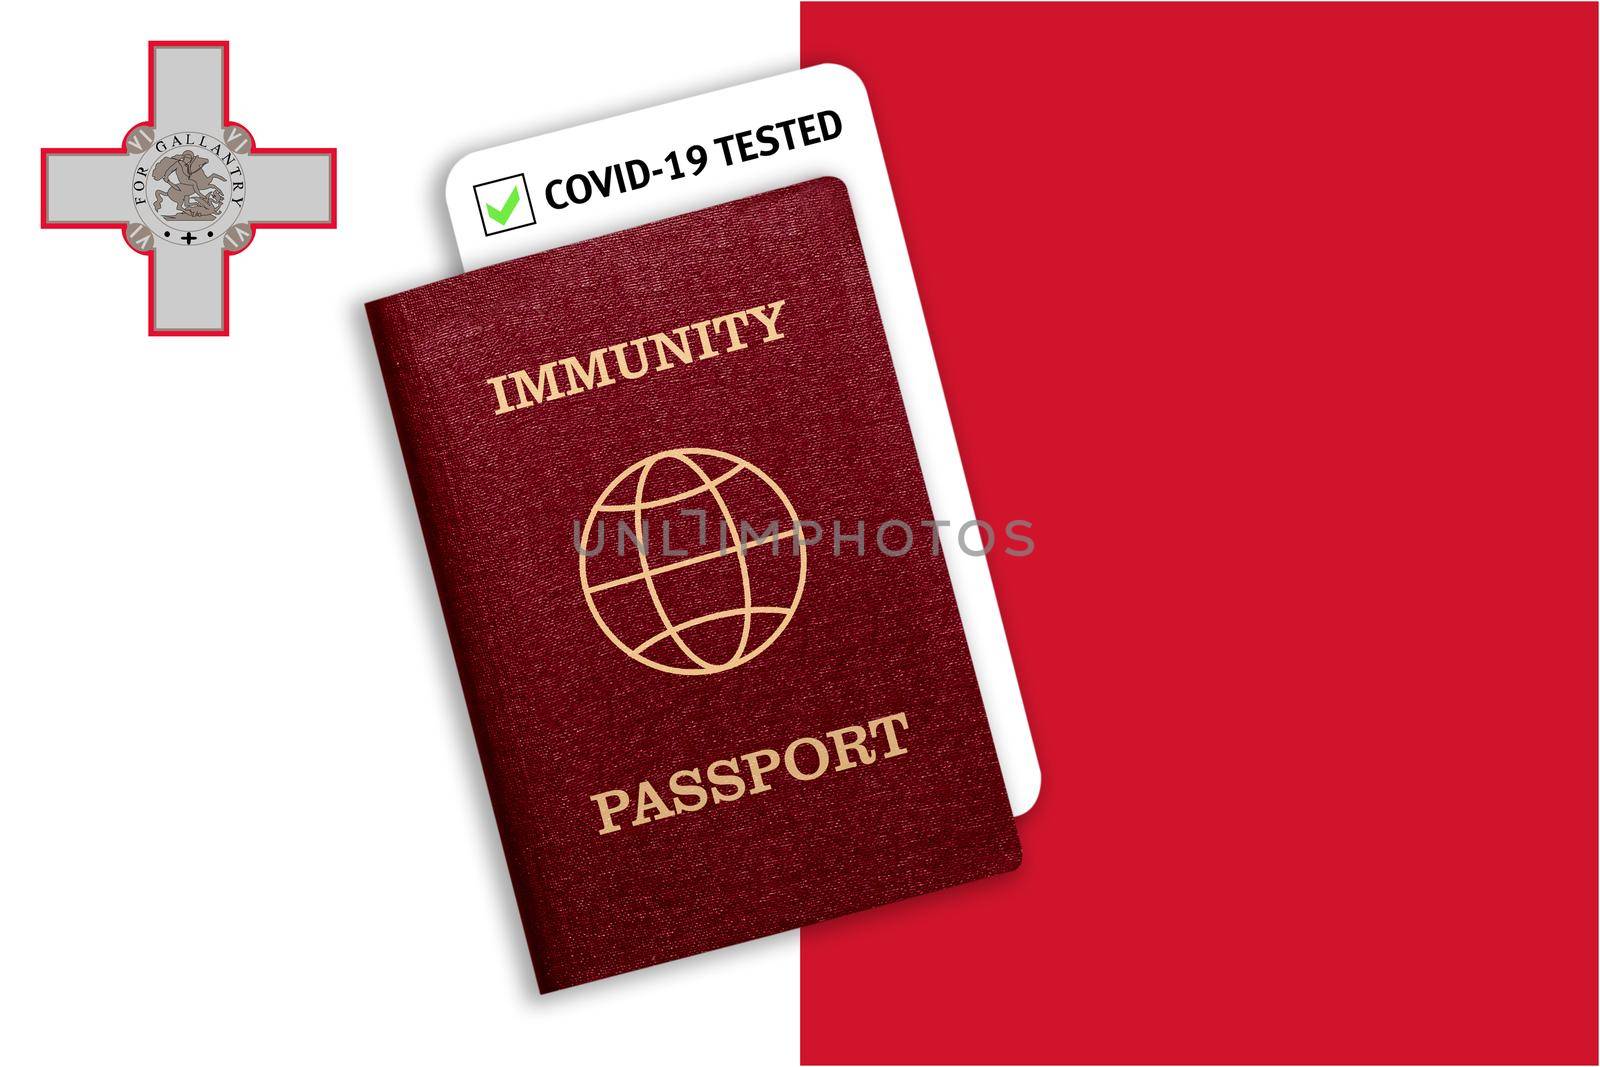 Concept of Immunity passport, certificate for traveling after pandemic for people who have had coronavirus or made vaccine and test result for COVID-19 on flag of Malta